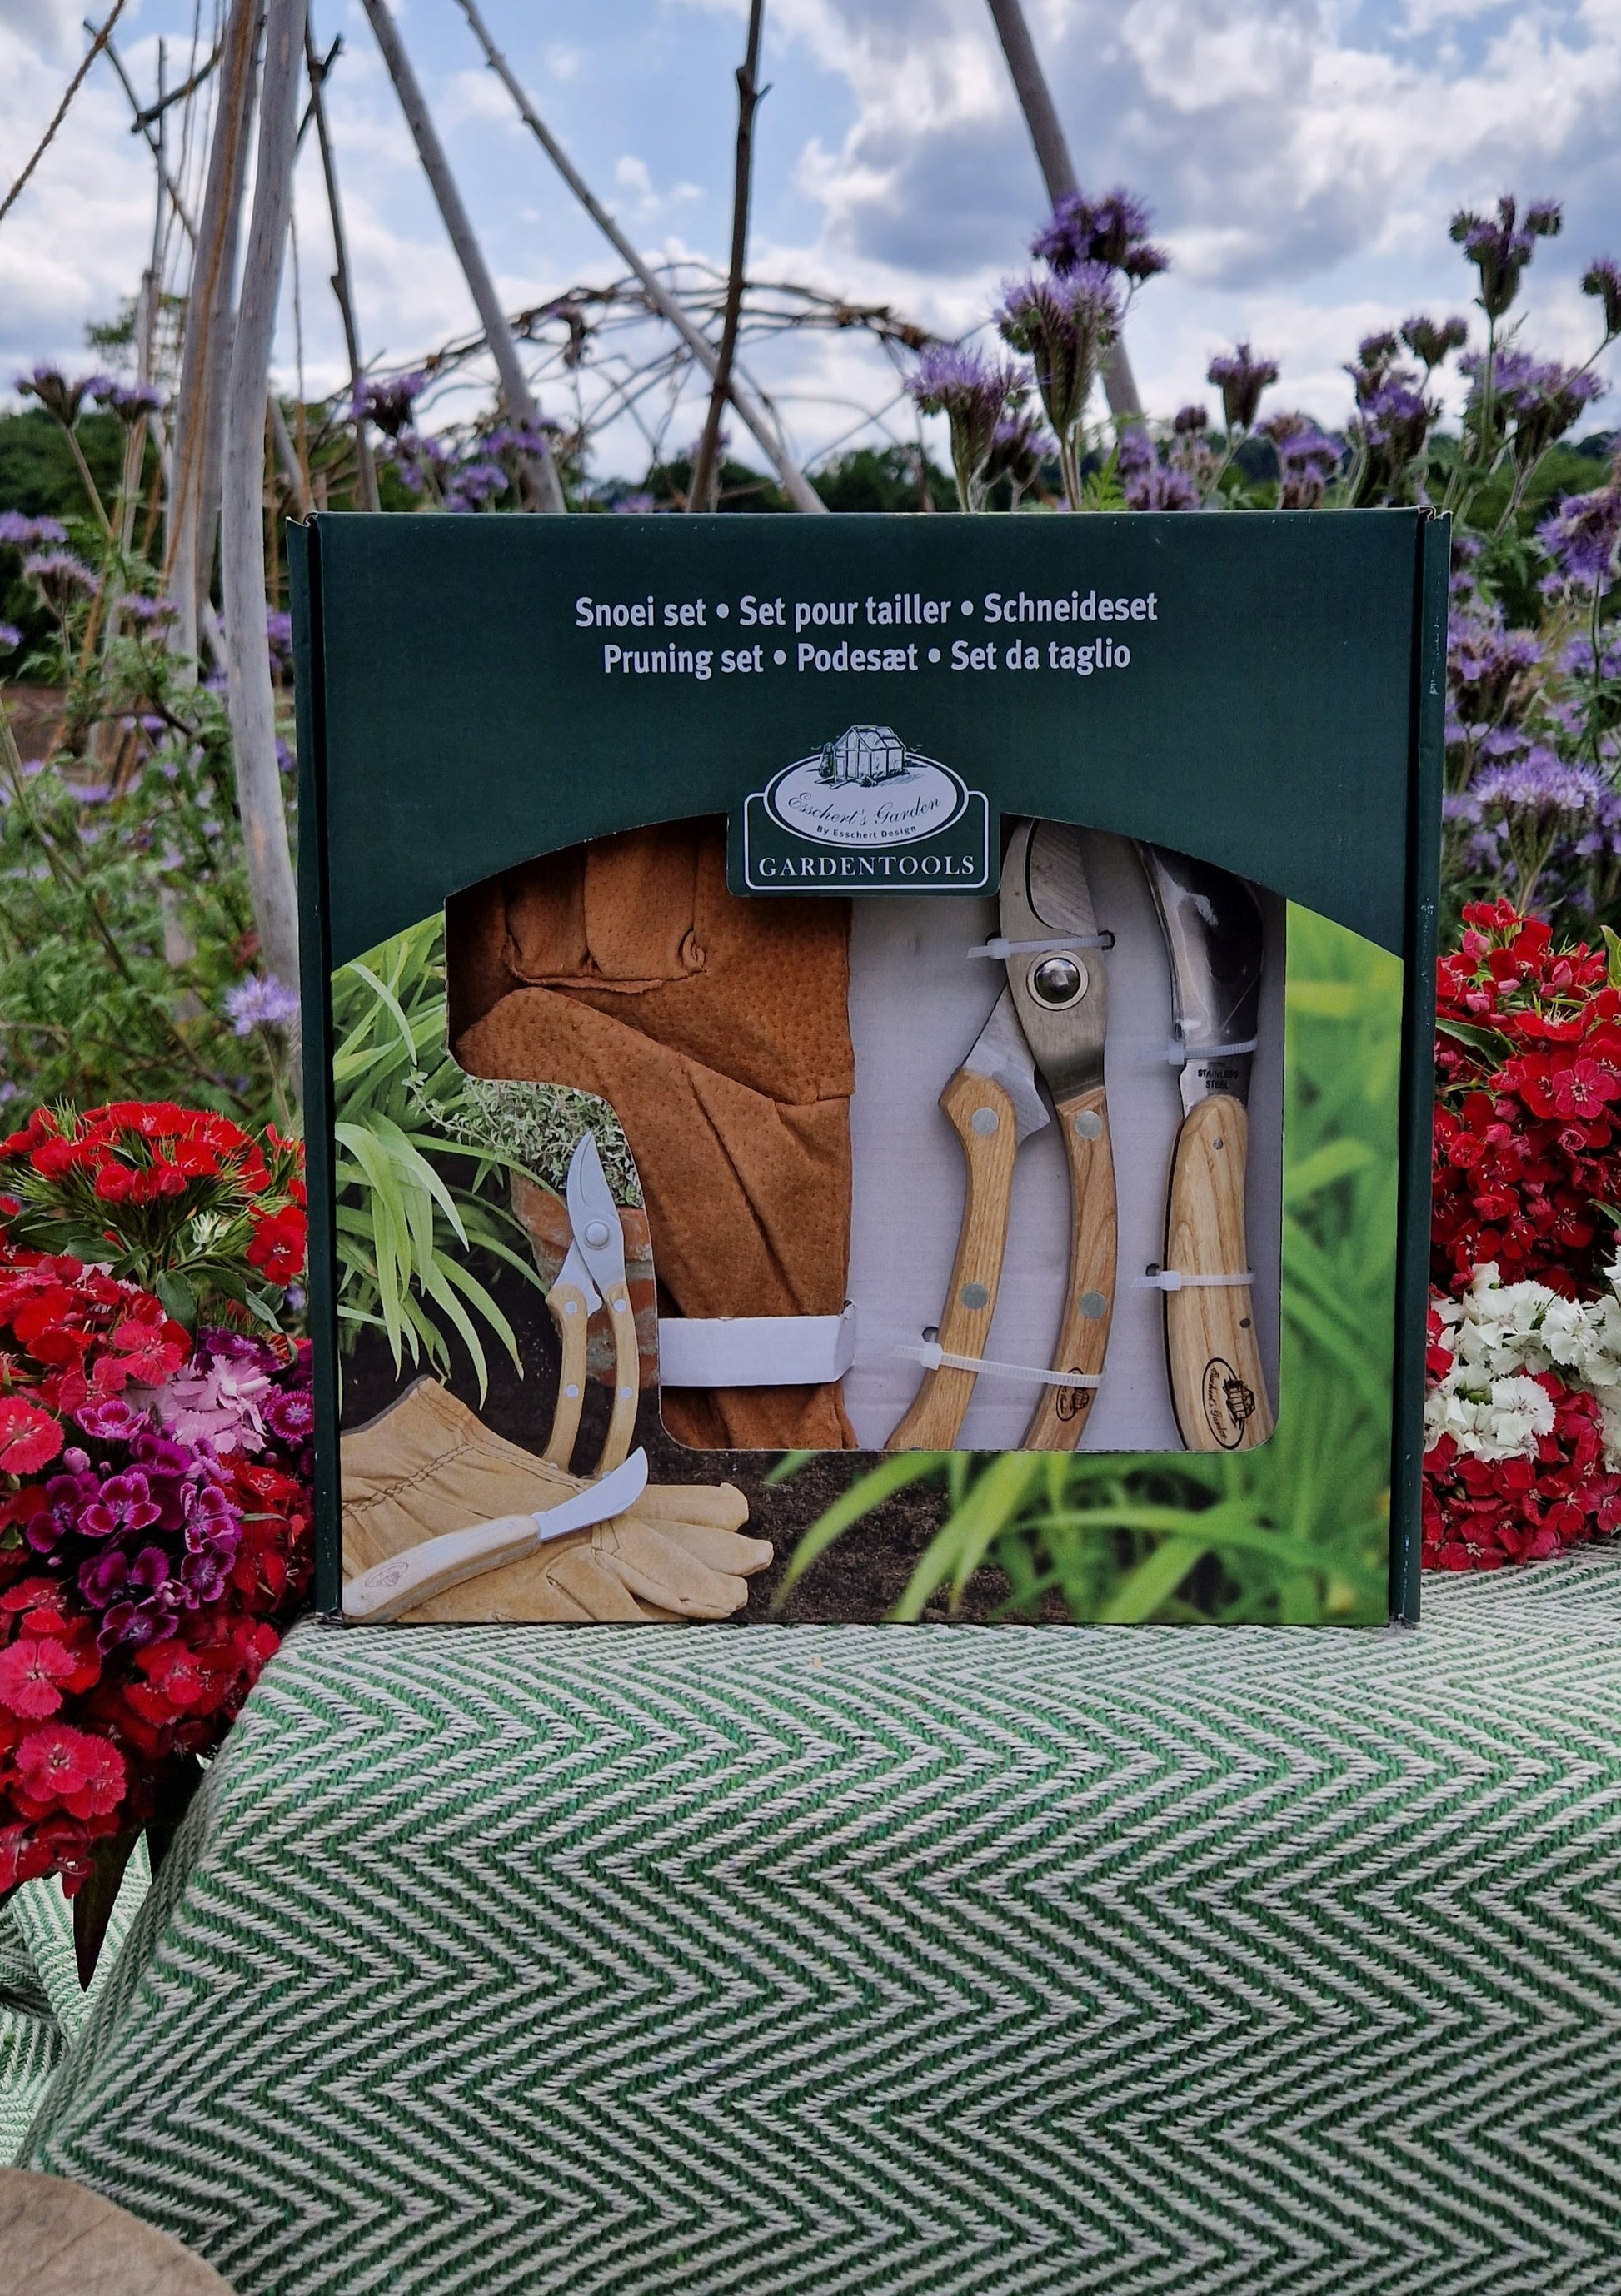 A garden pruning set containing sheers, a knife and a pair of brown leather gloves in a green box, propped against a crate covered in a green blanket in a garden.